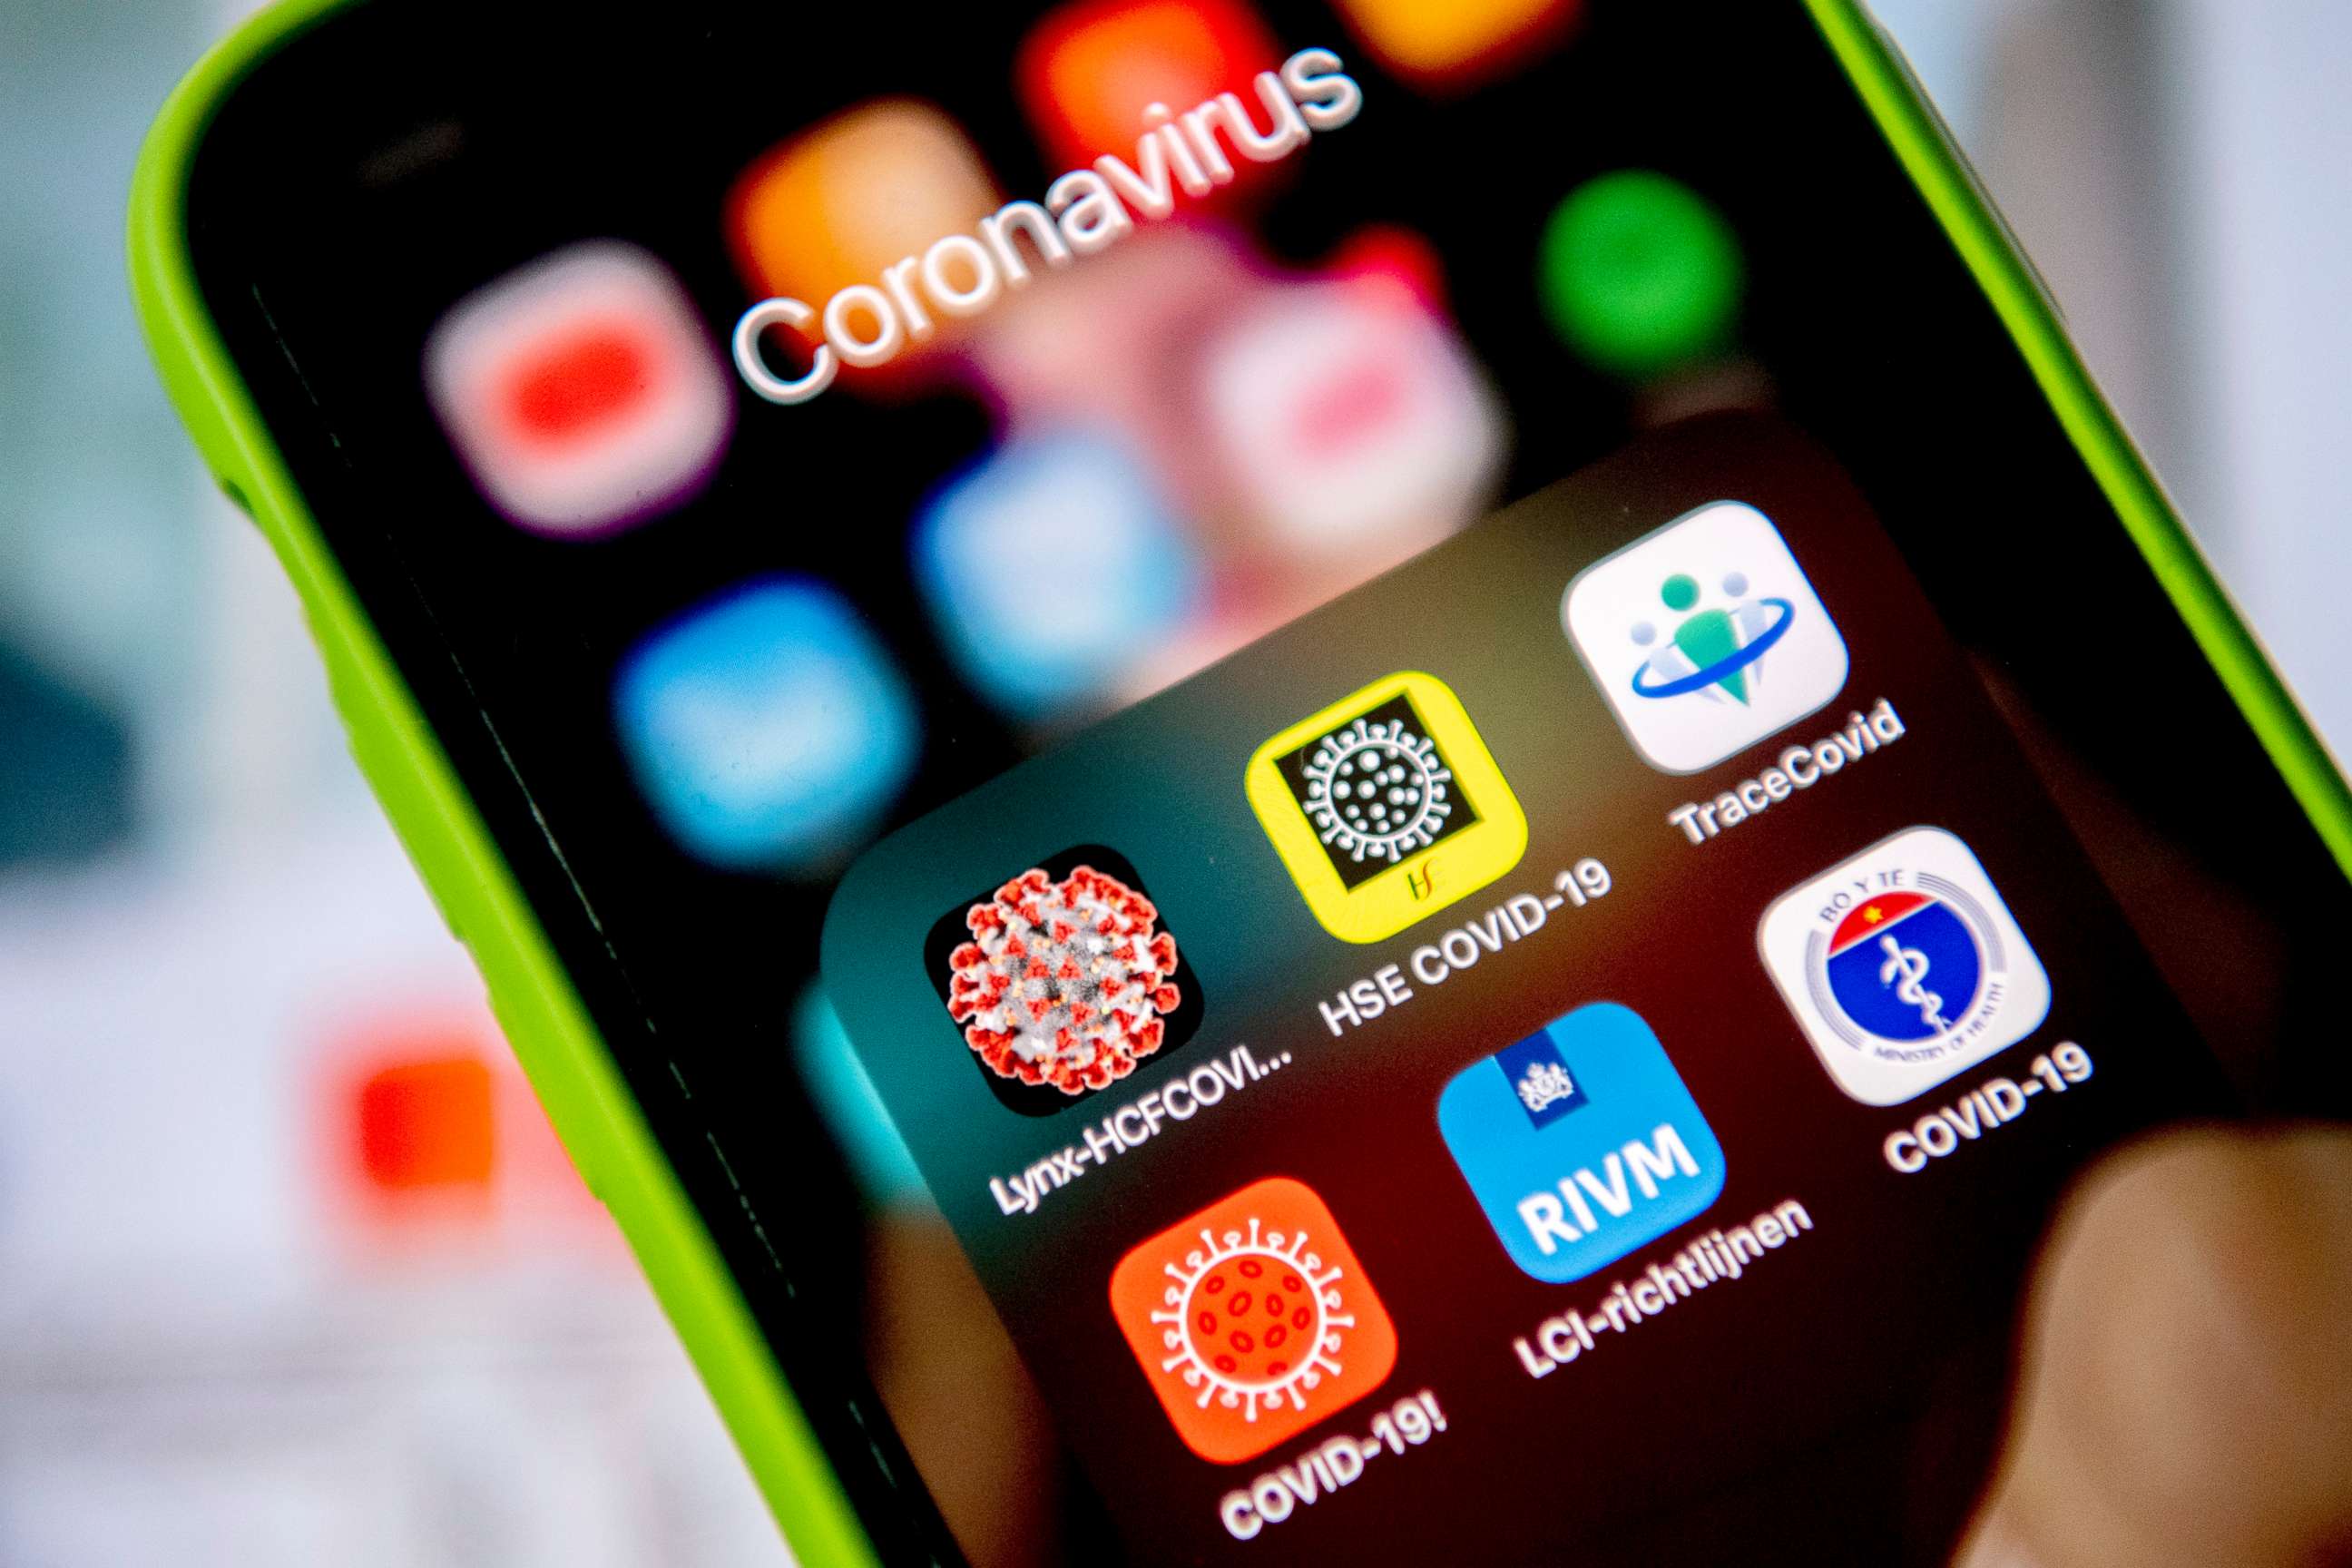 PHOTO: A mobile phone displays COVID-19, coronavirus related apps, April 8, 2020.